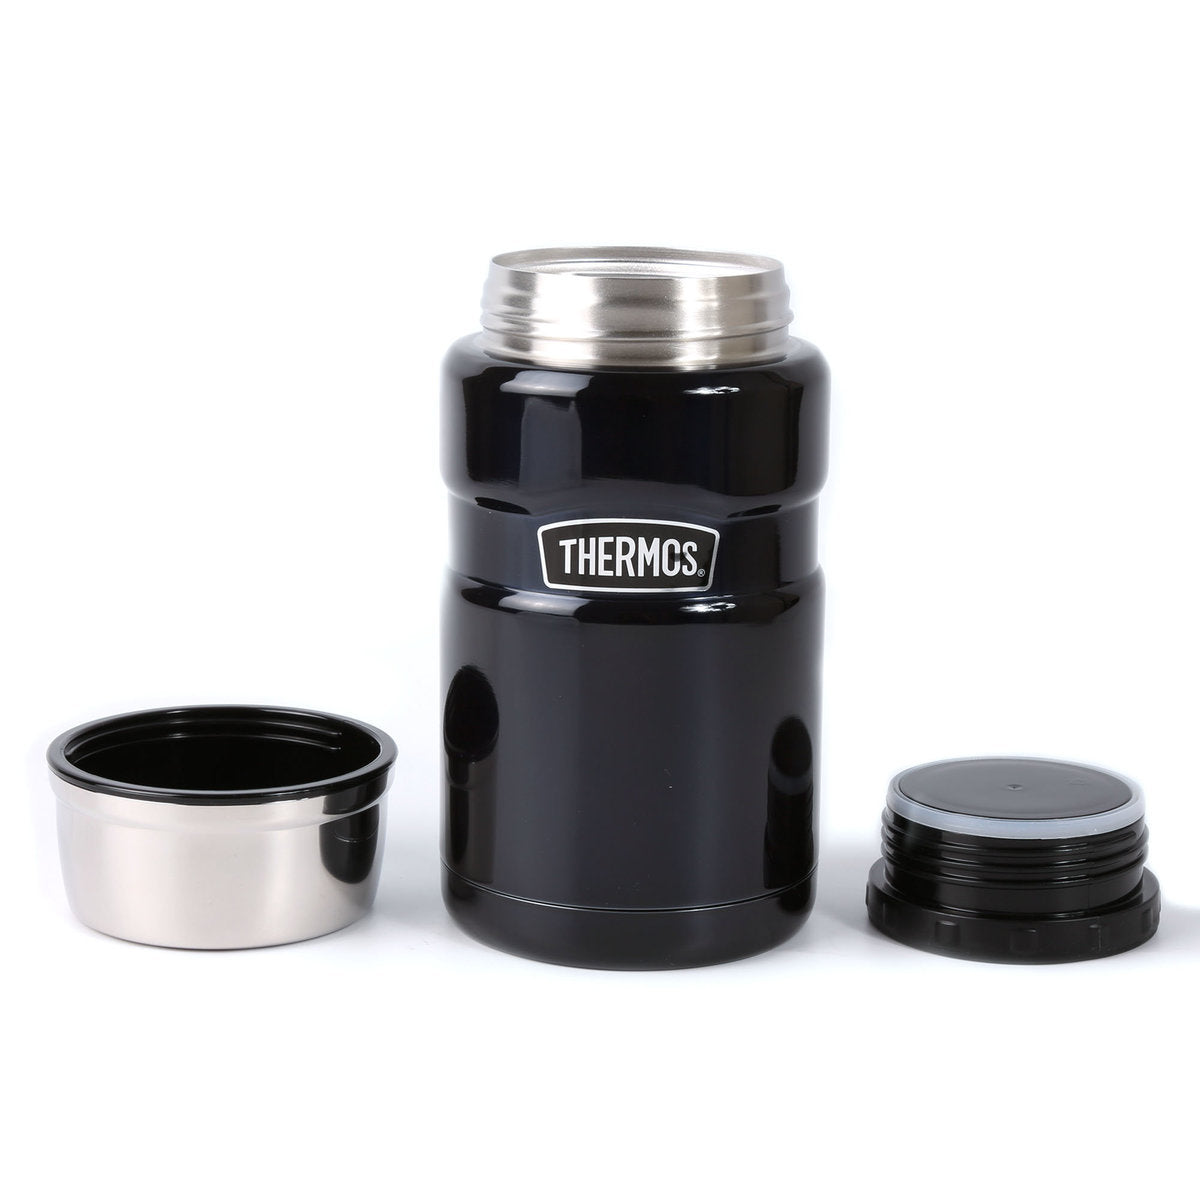 Thermos SK3020 Series Stainless Steel Food Jar 710mL (Midnight Blue) Without Spoon 膳魔師不鏽鋼食物燜燒壺 front view